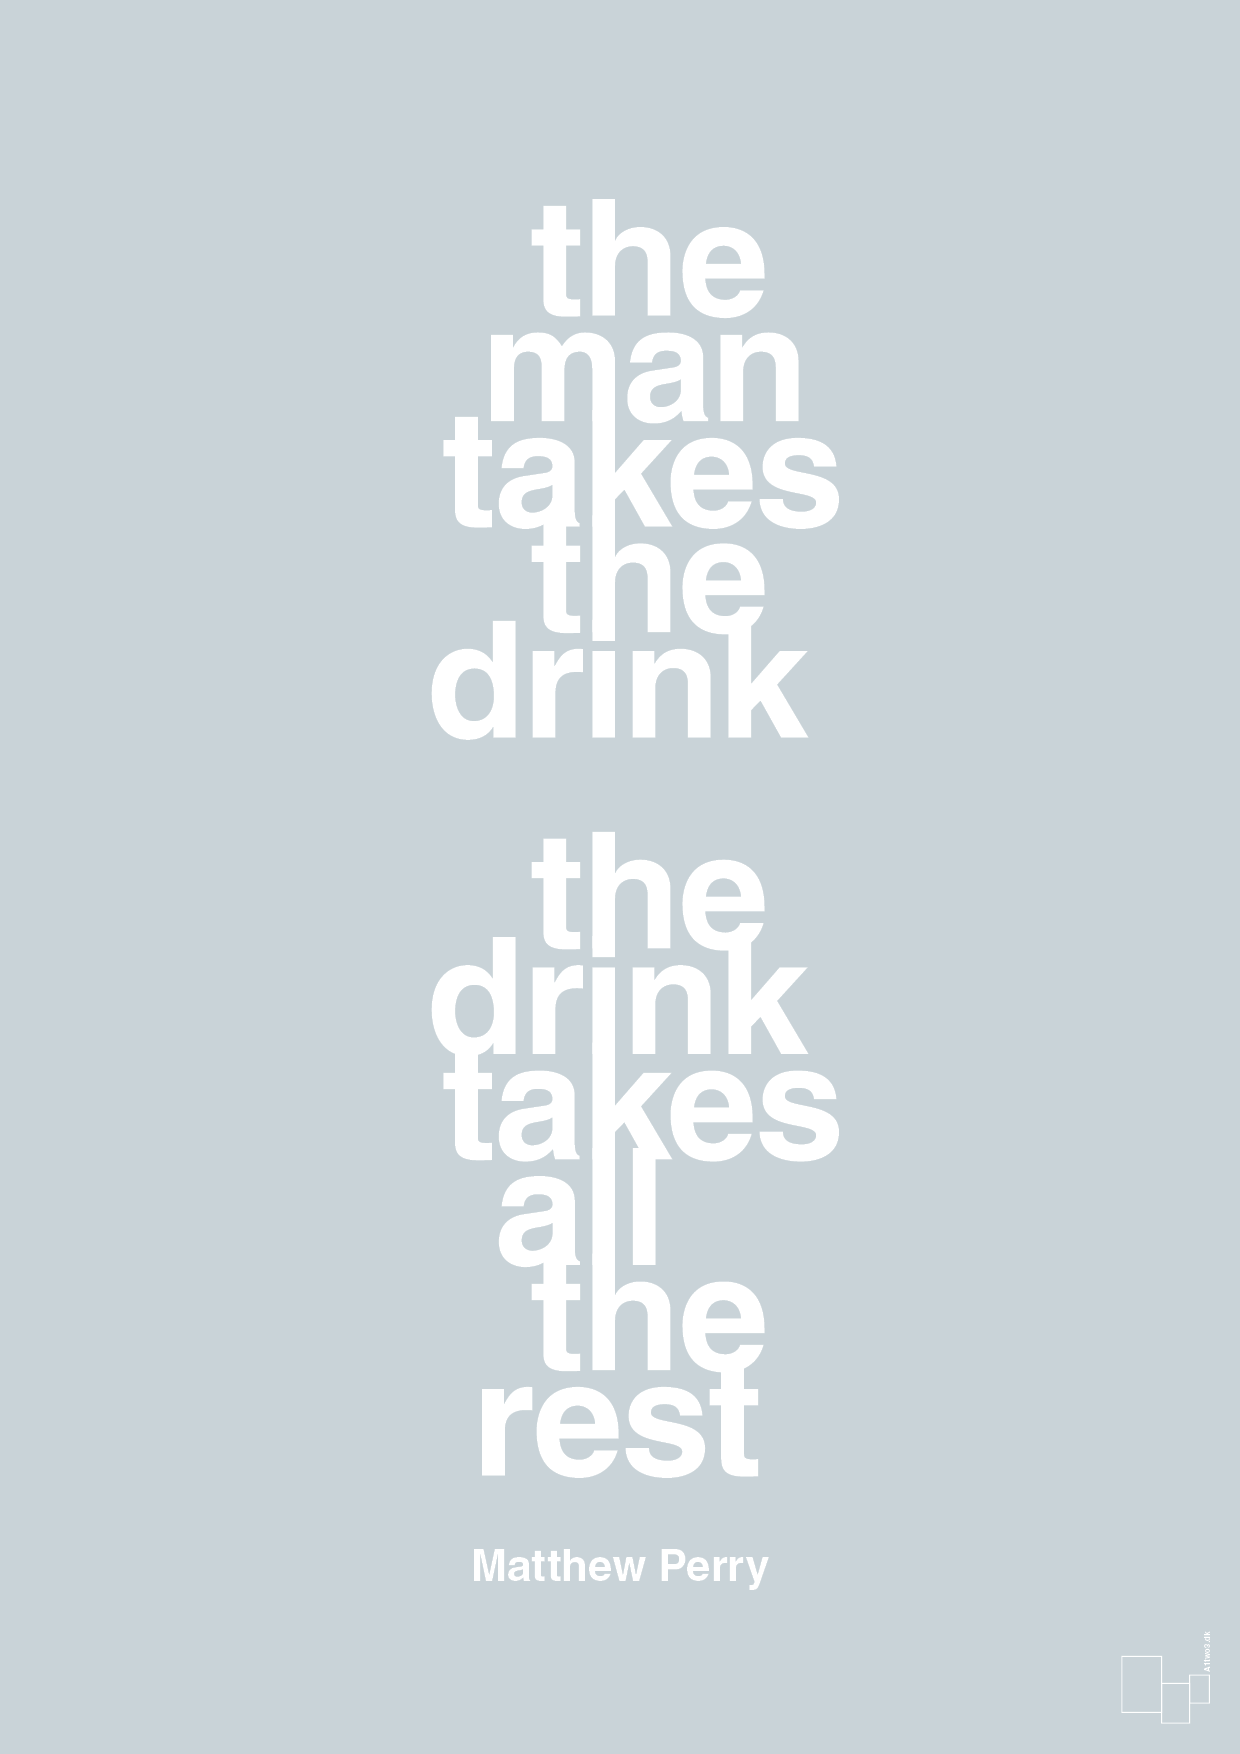 the man takes the drink the drink takes all the rest - Plakat med Citater i Light Drizzle